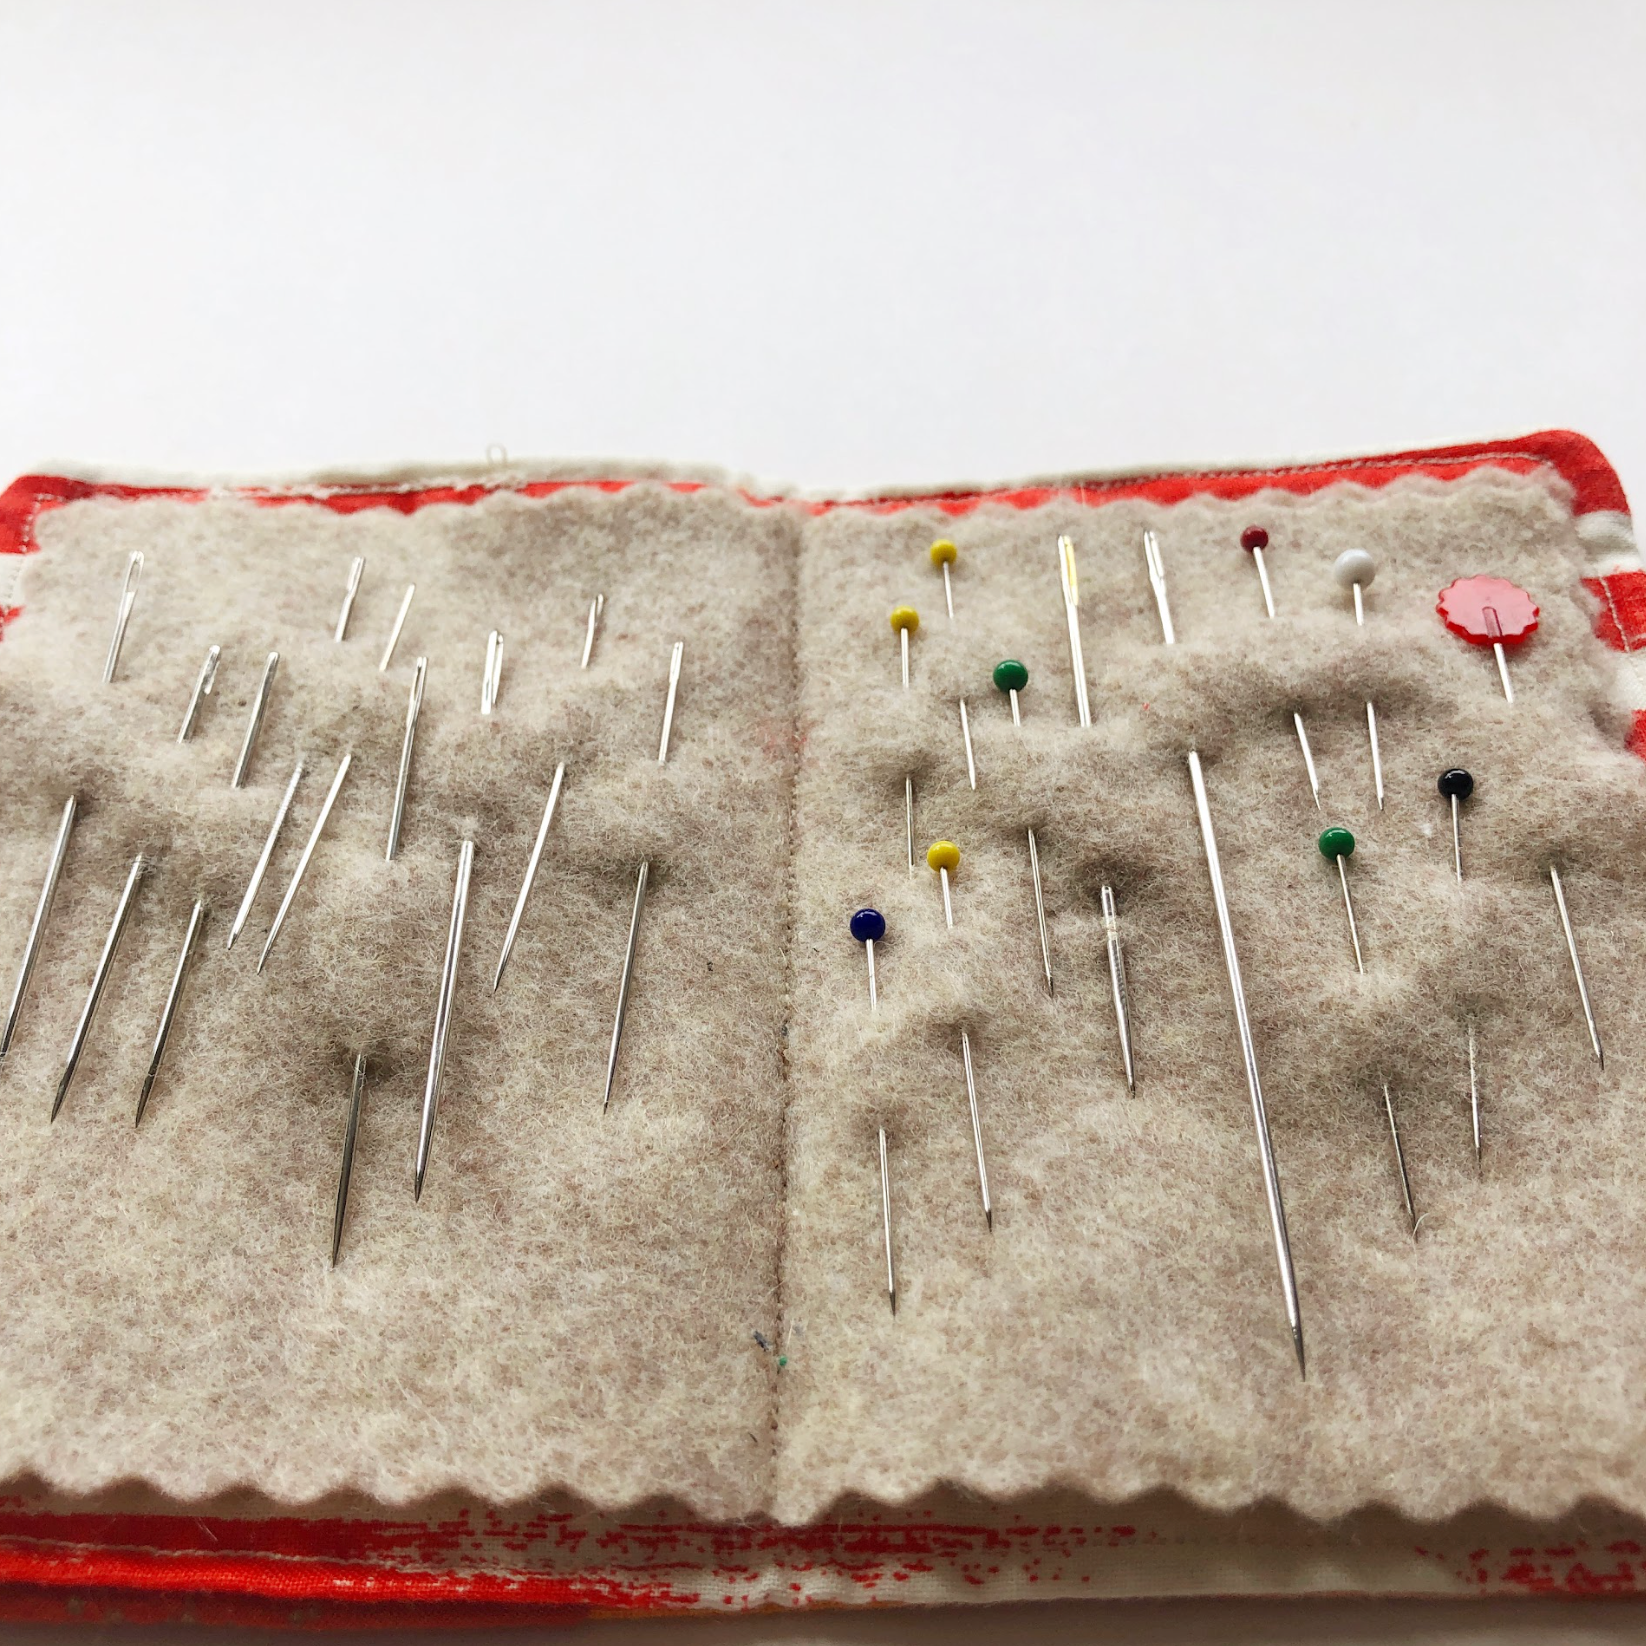 SEWING CLASS: Crazy Quilt a Needle Book